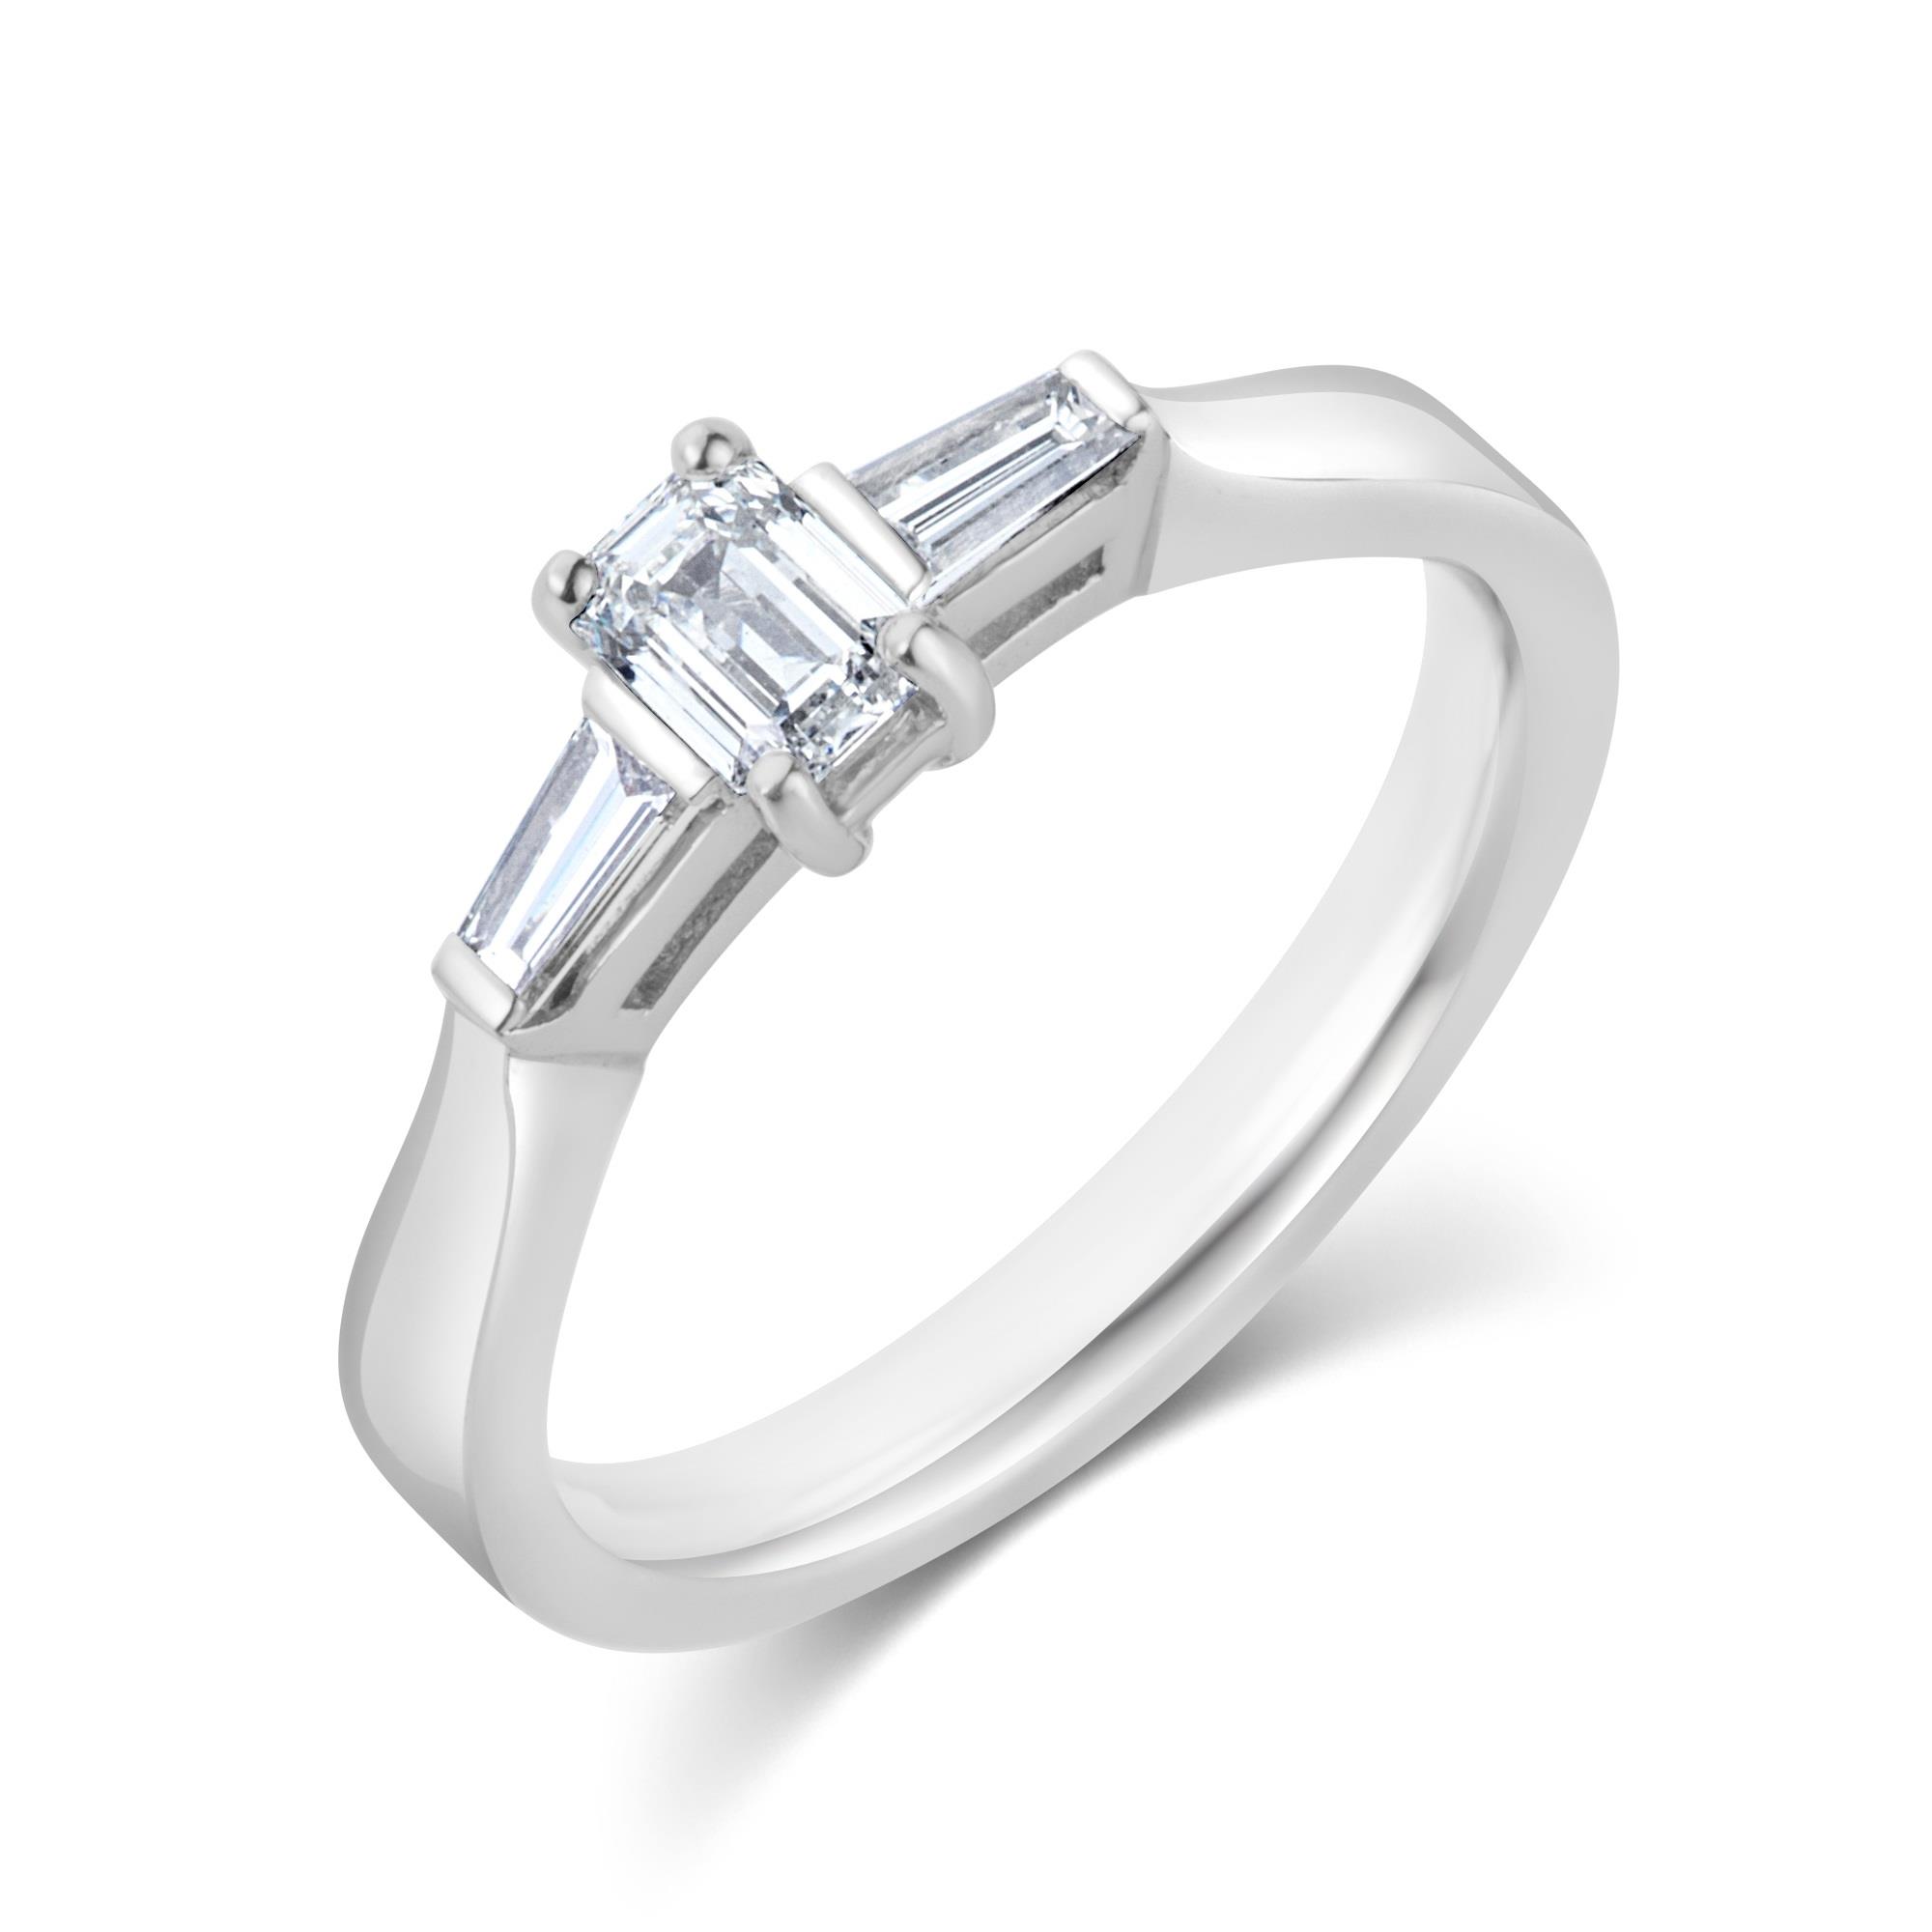 Hungry for a Baguette Diamond Engagement Ring?